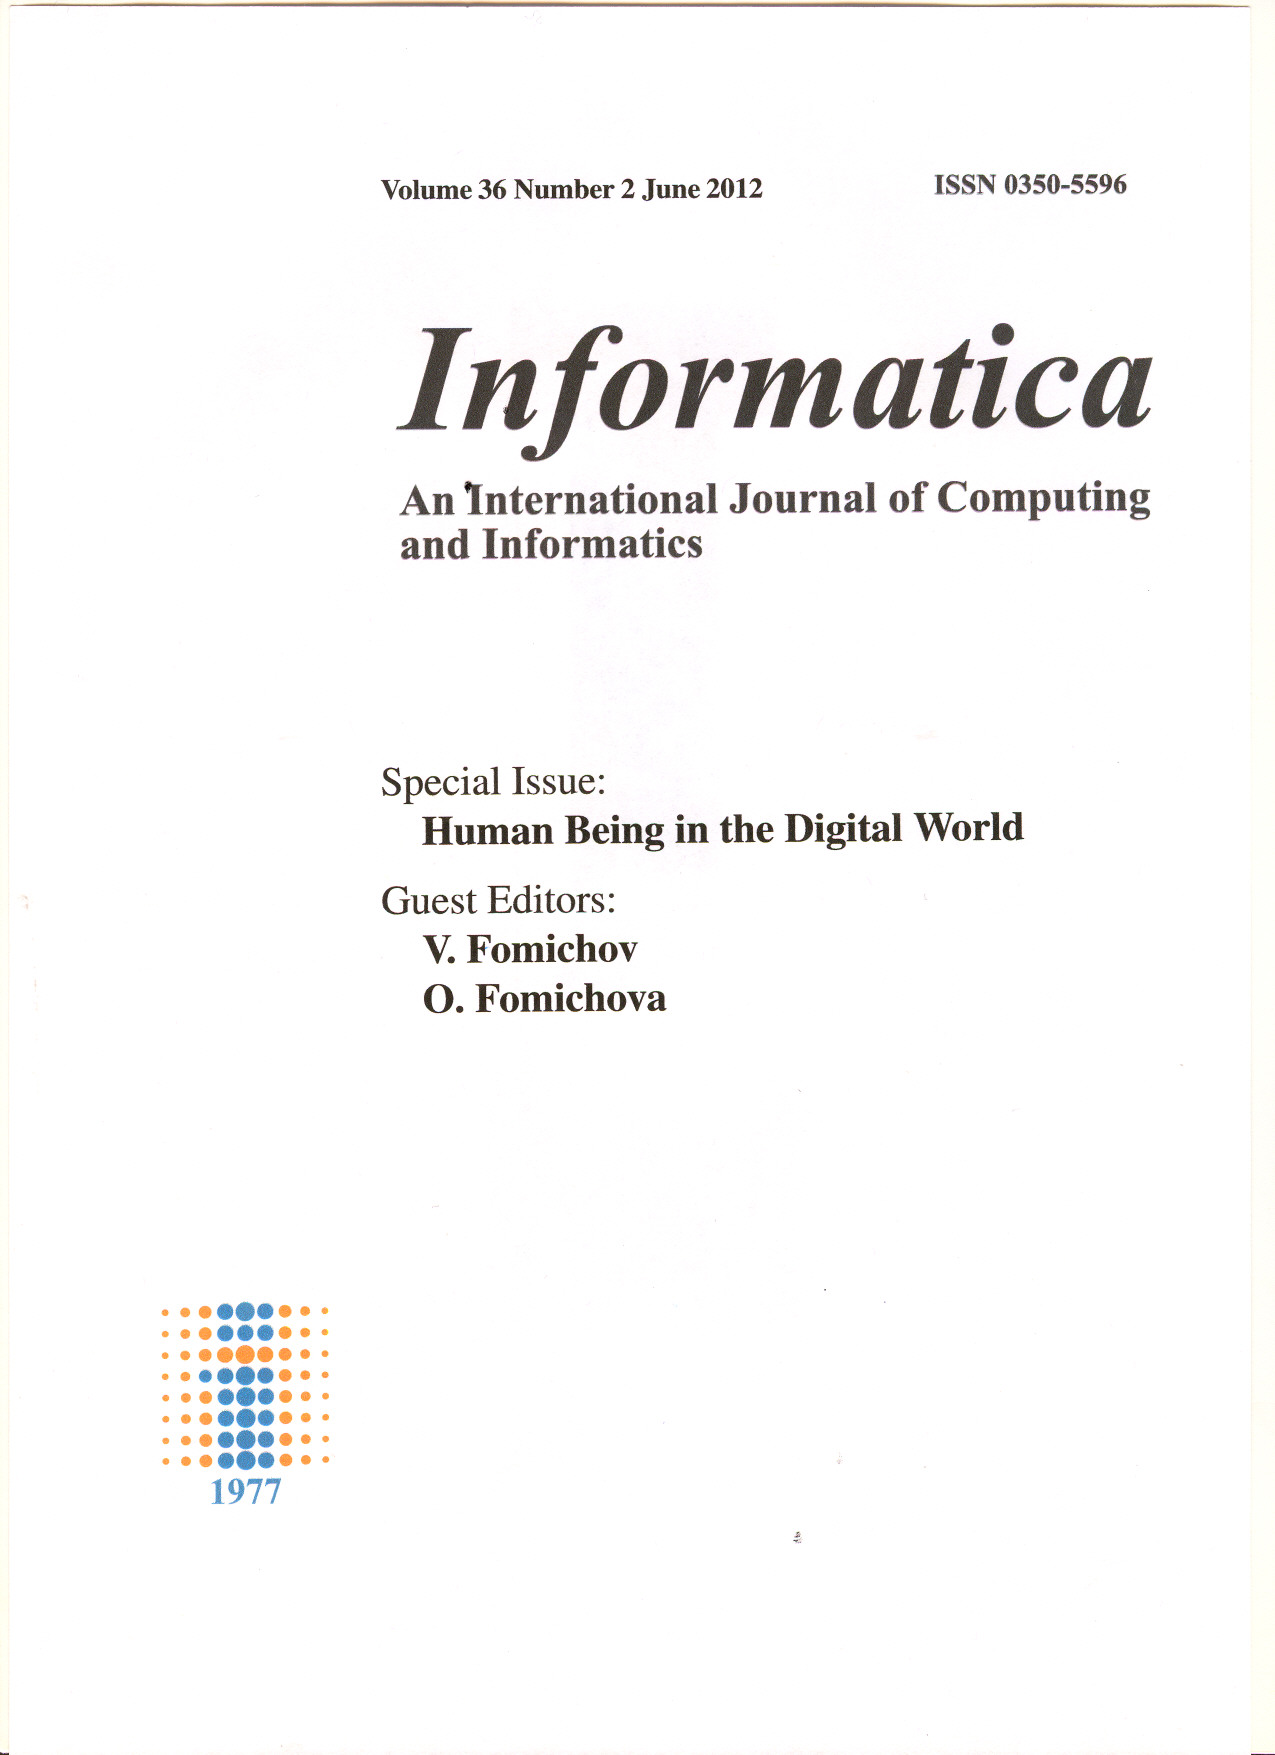 V.A. Fomichov and O.S. Fomichova (Guest Editors) Special Issue on the Human Being in the Digital World. Informatica. An International Journal of Computing and Informatics